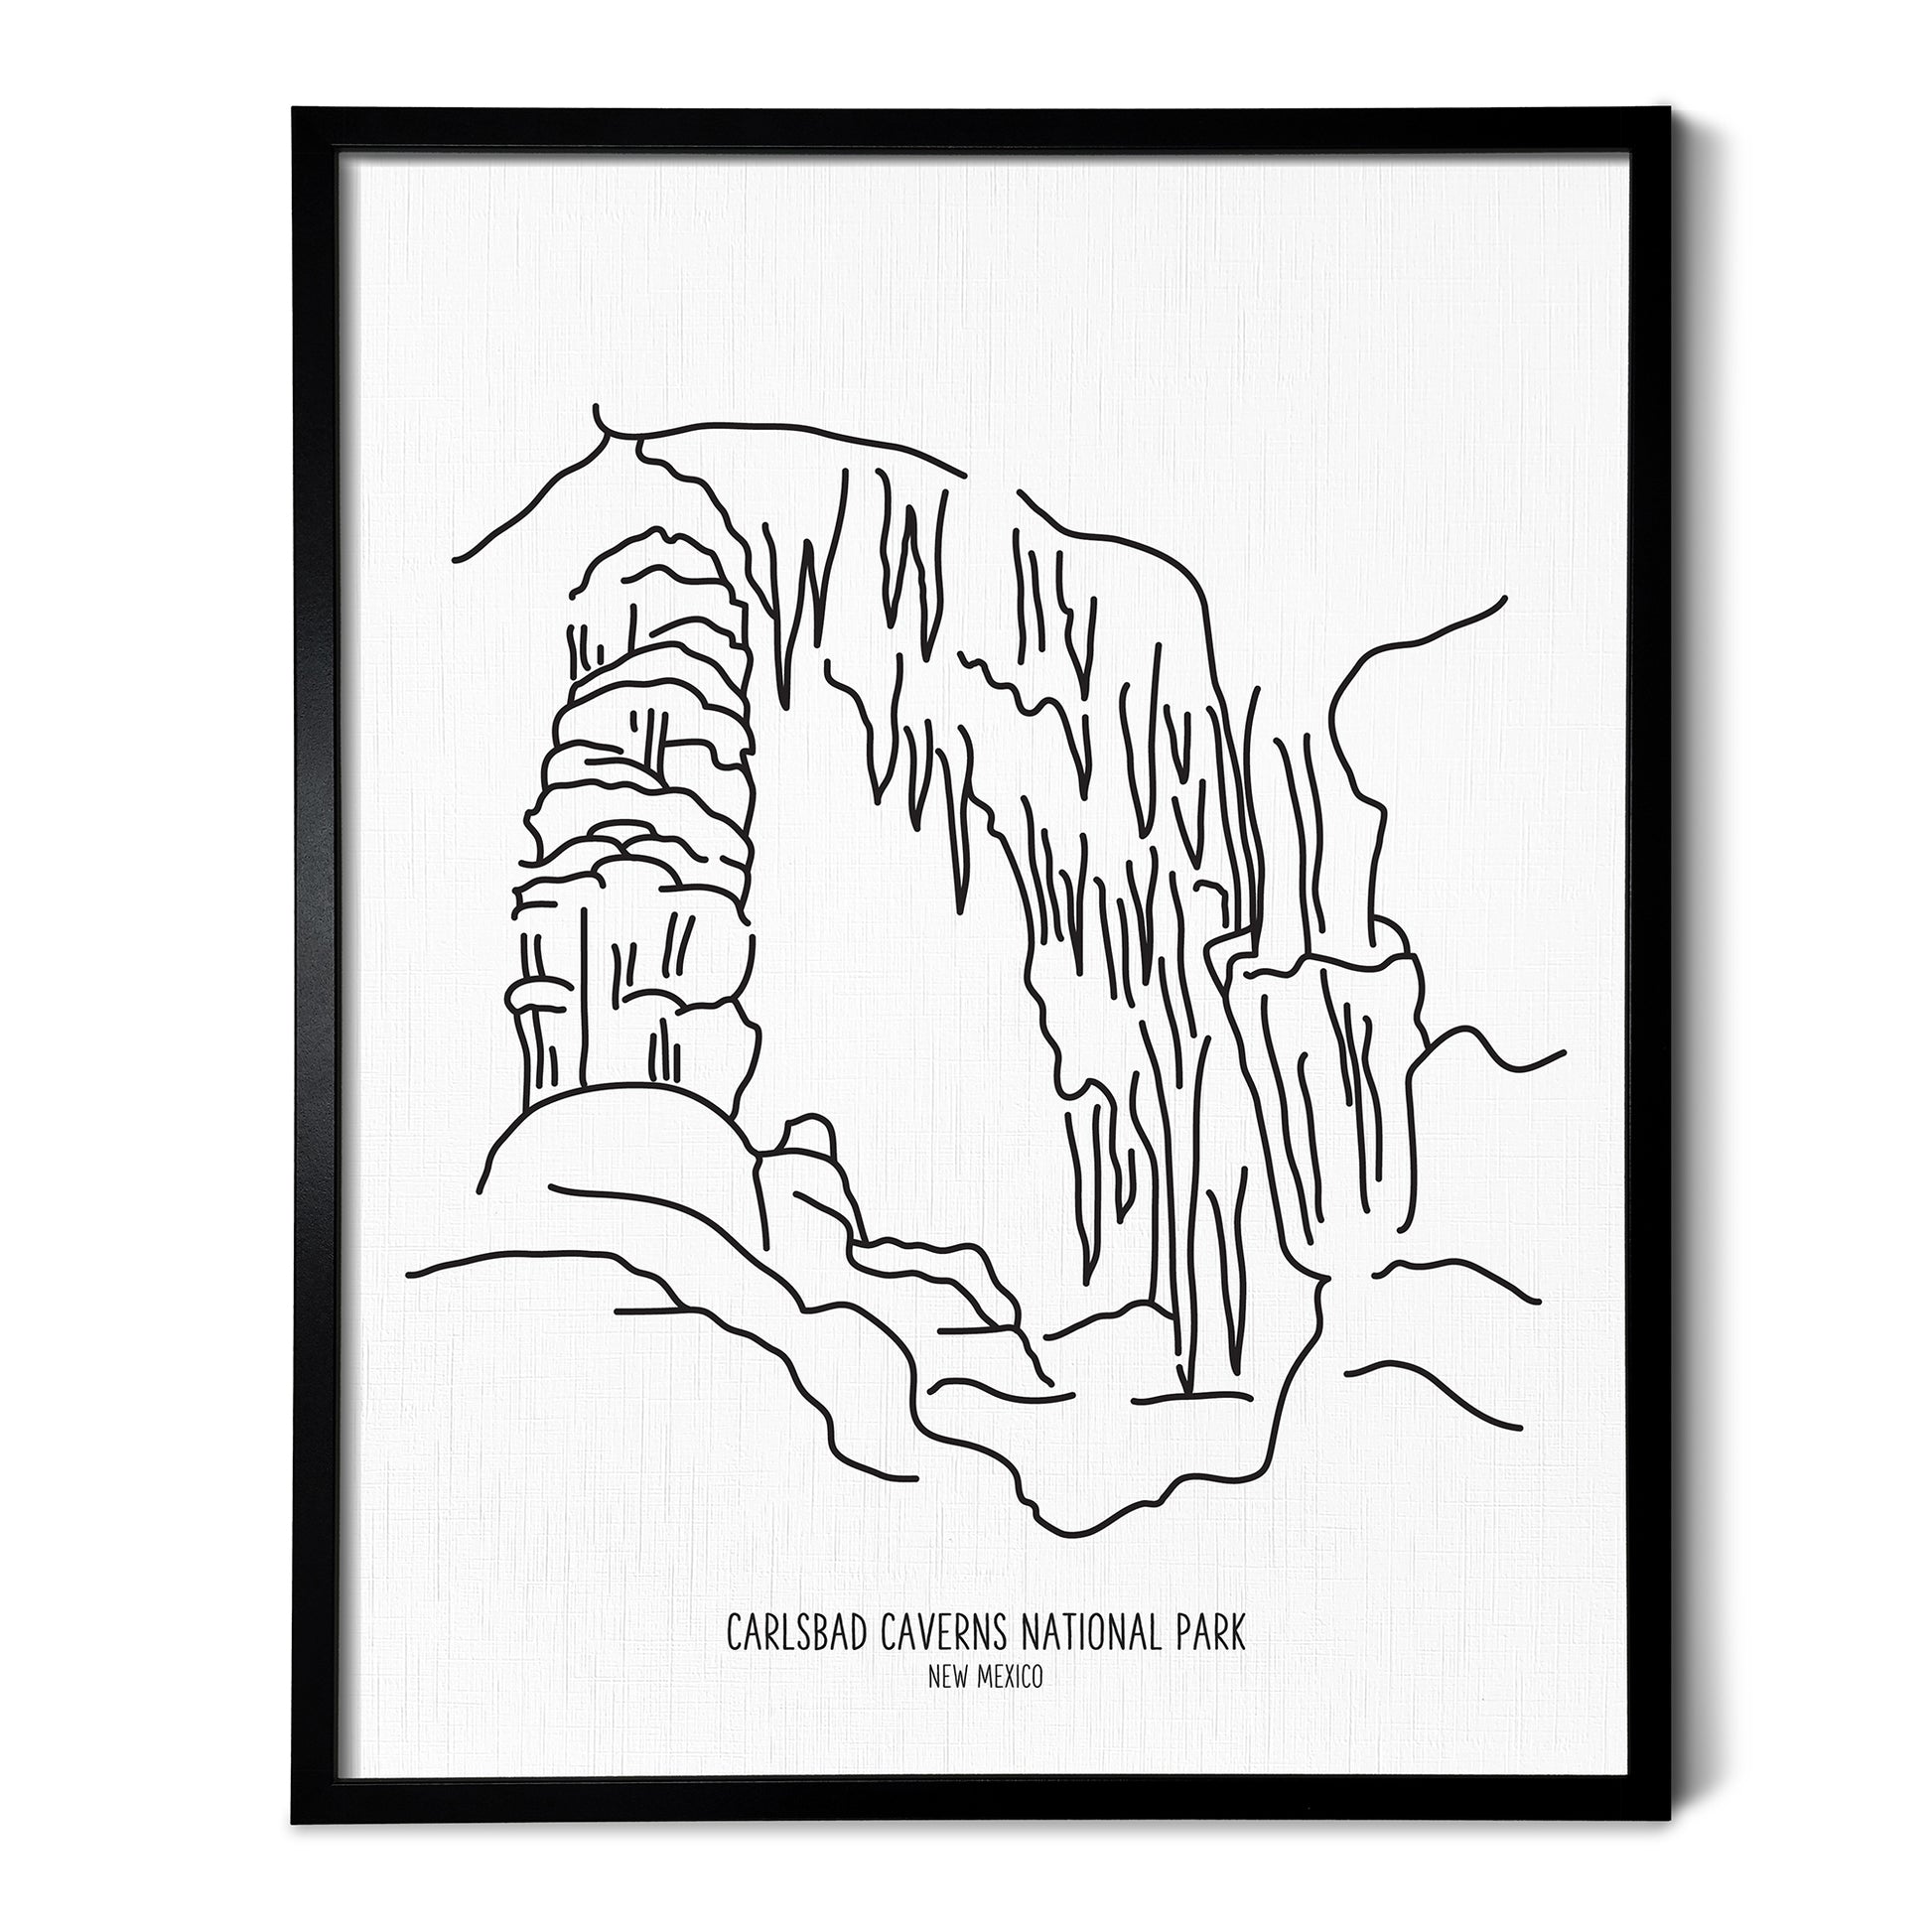 A line art drawing of Carlsbad Caverns National Park on white linen paper in a thin black picture frame